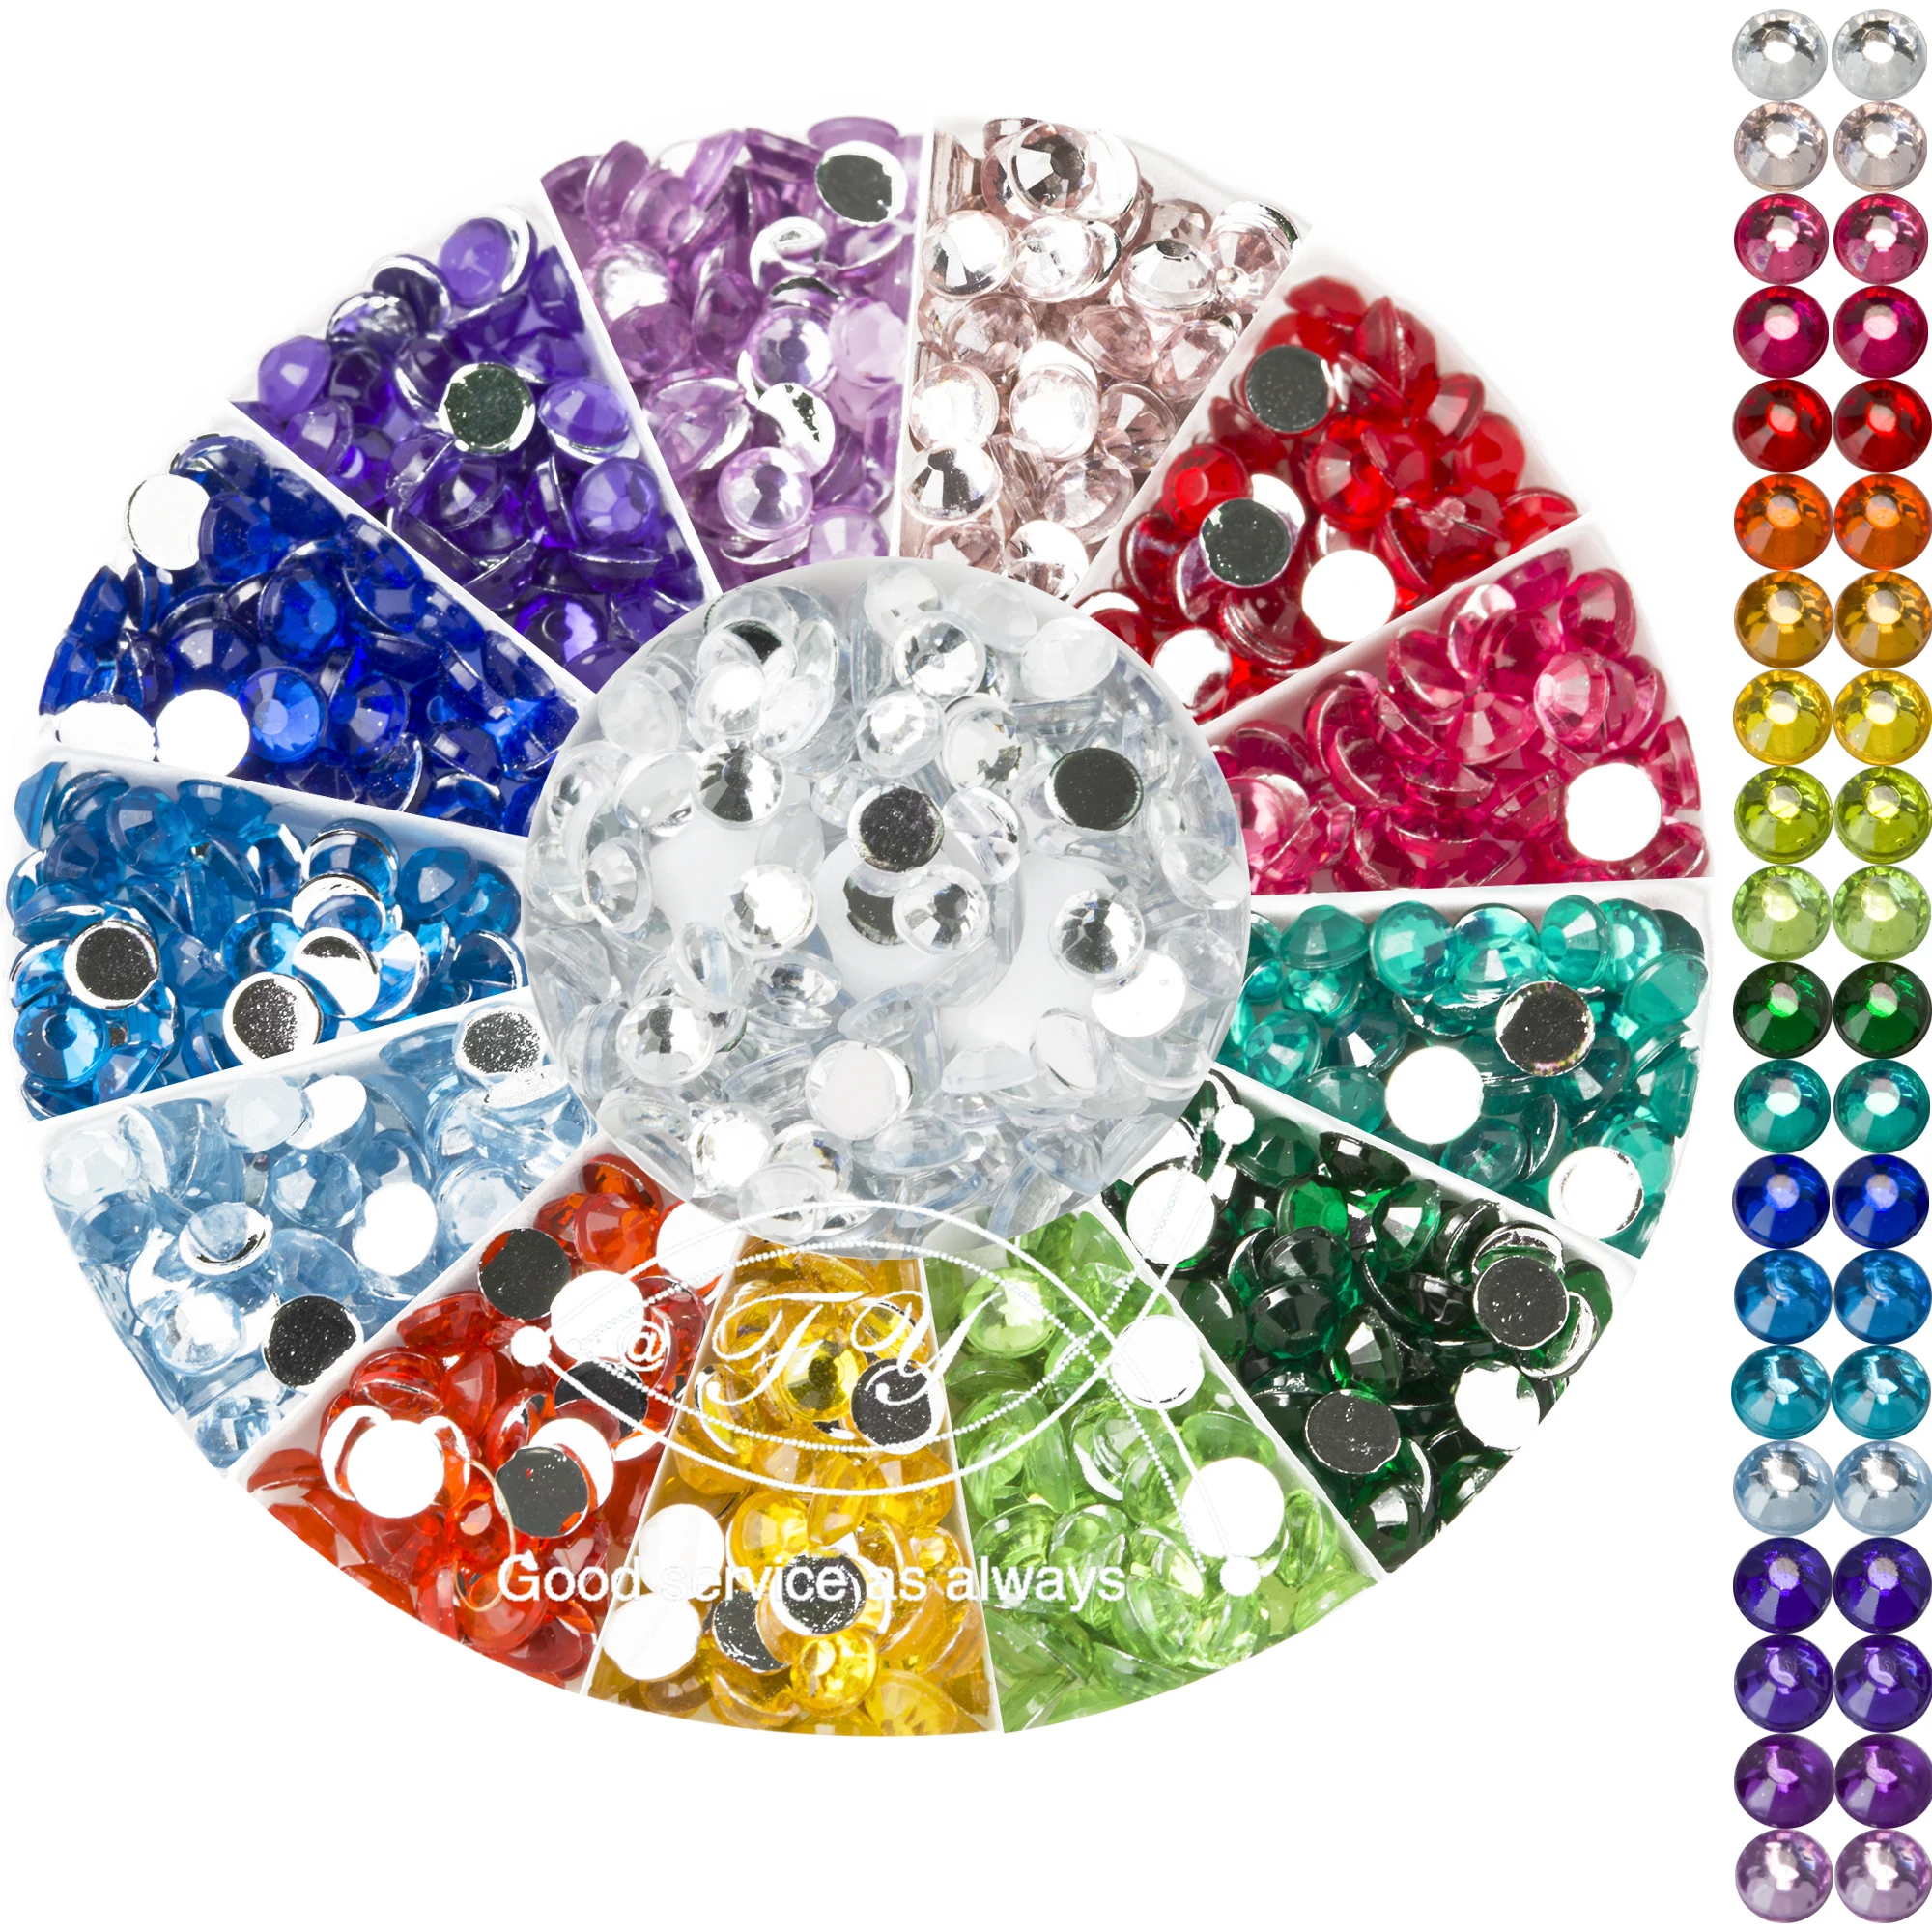 Resin Square/Round Diamond Beads 35 Colors Diamond Art Kit AB Drill Crystal  Beads Accessory for 5D Diamond Painting Accessories - AliExpress